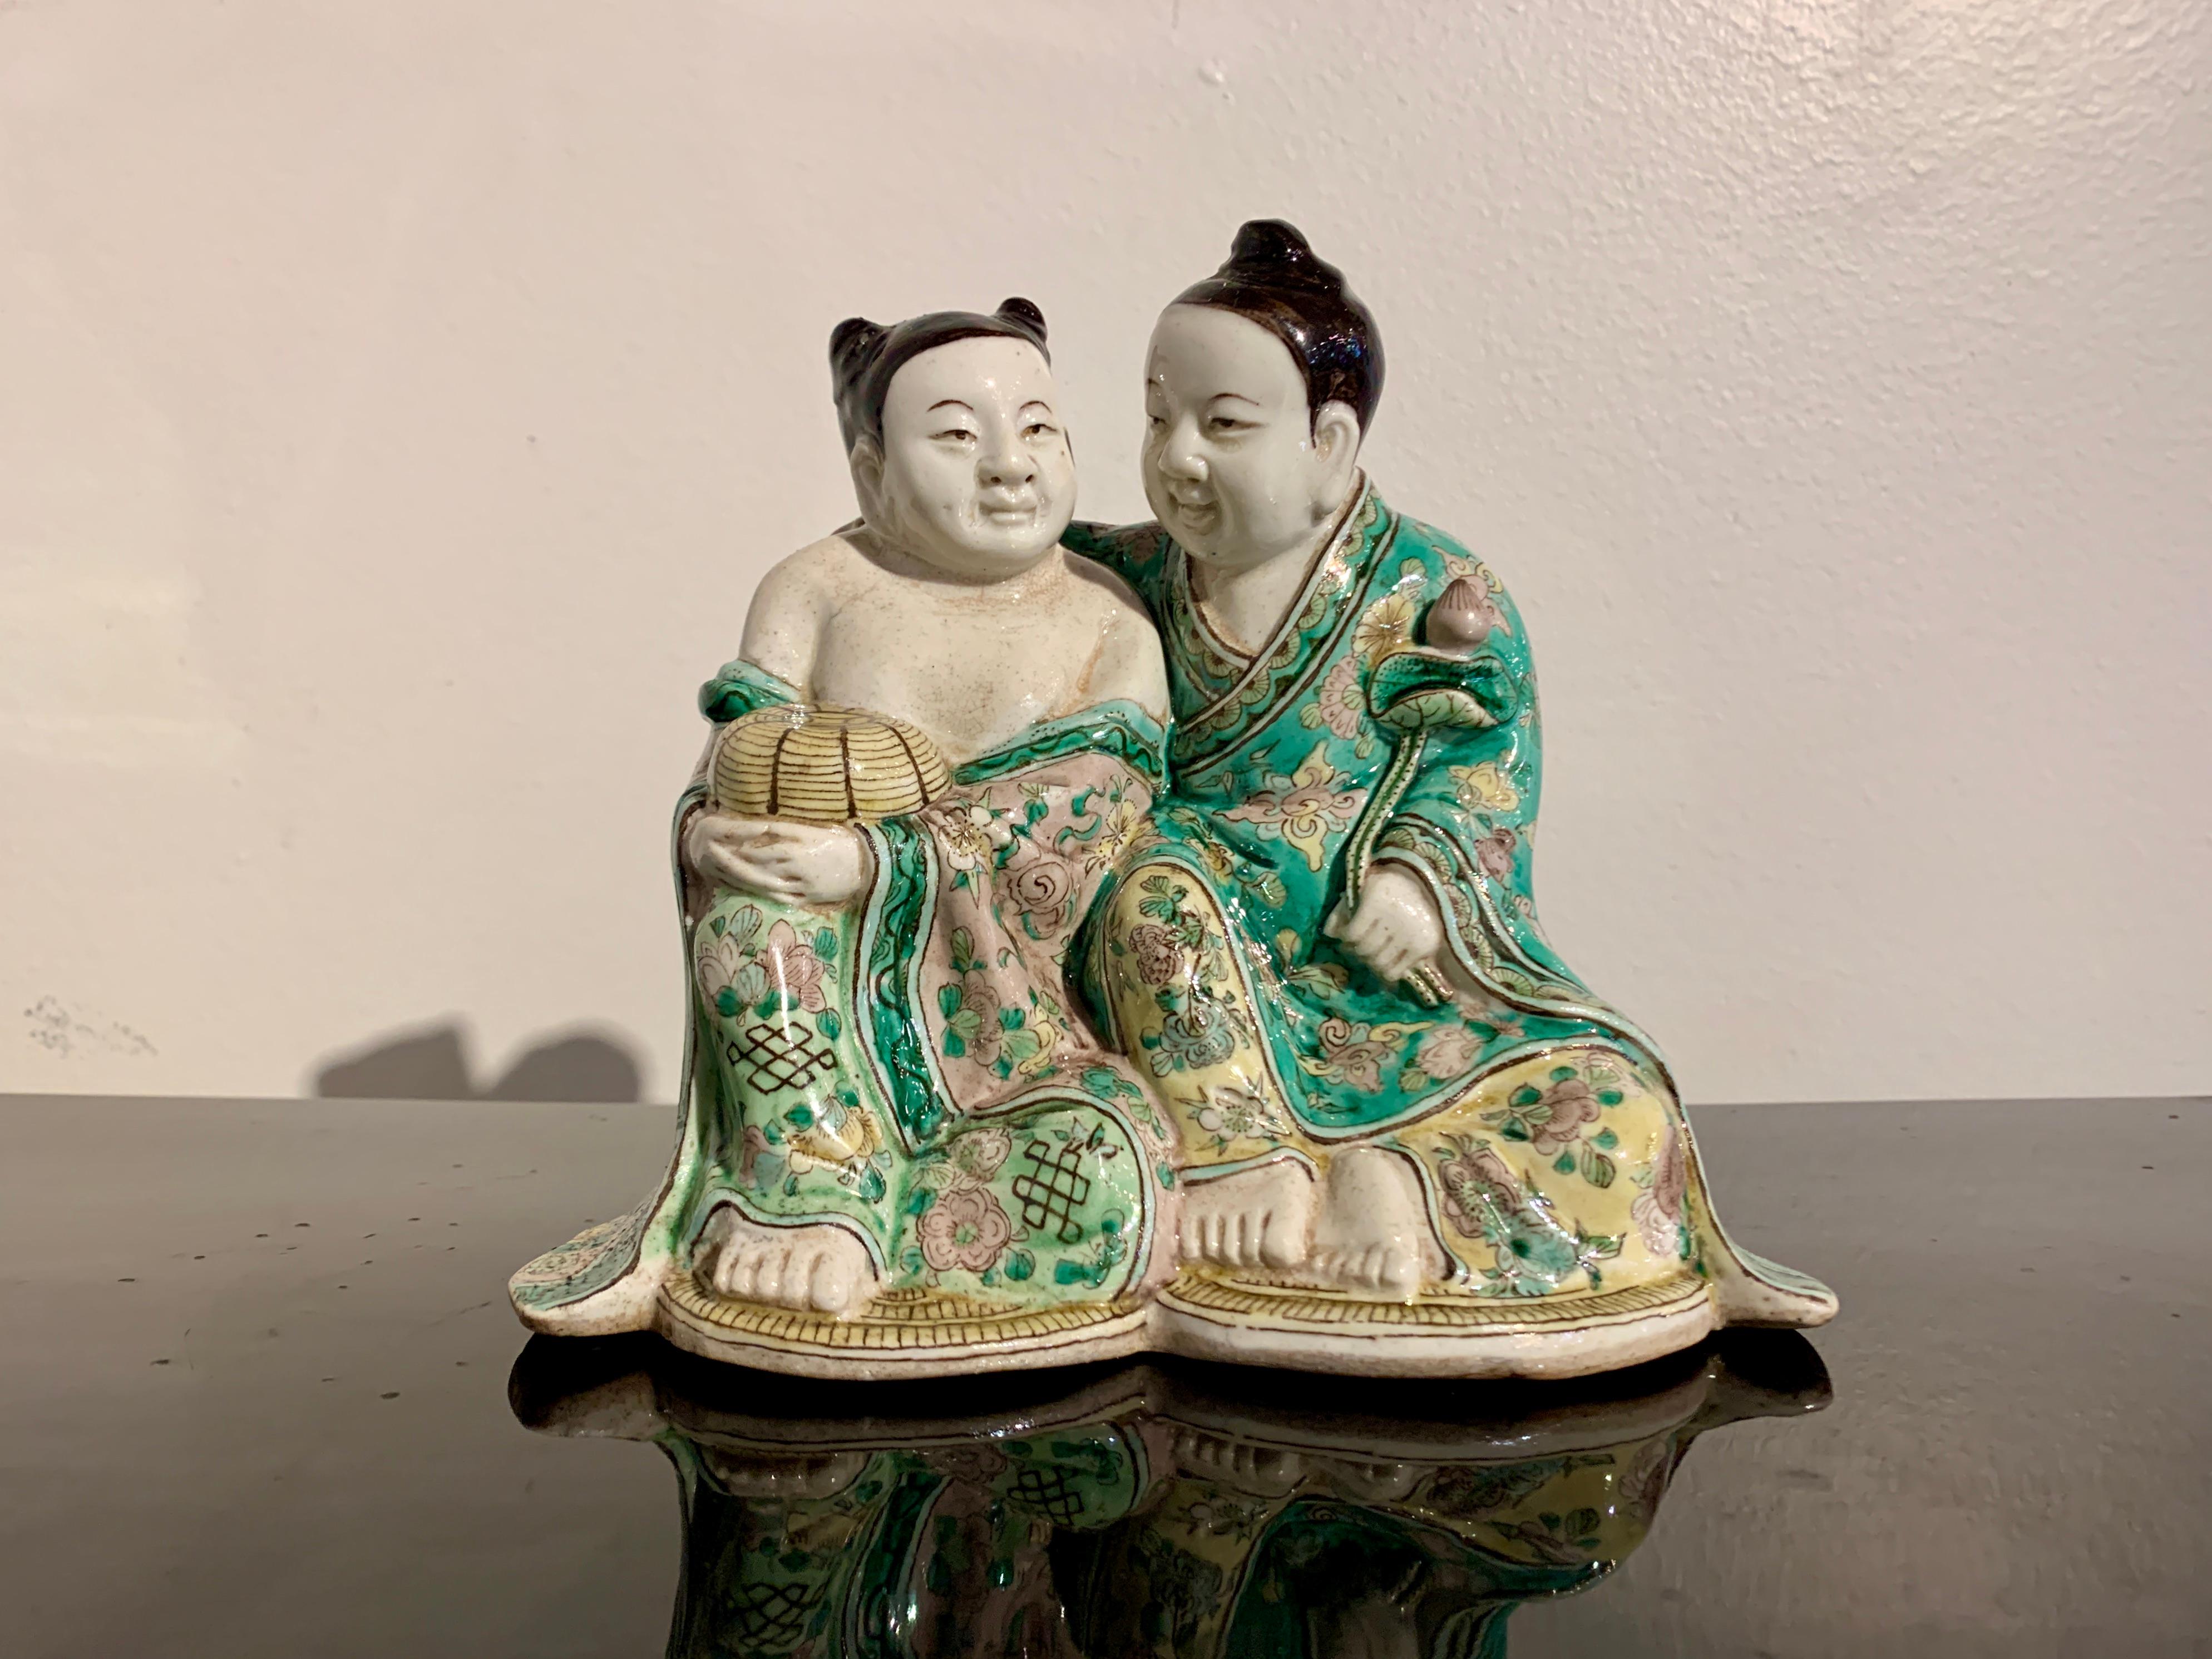 A delightful famille verte enameled porcelain figural group of the He-He Er Xian, the Twins of Harmony and Union, late Qing Dynasty, circa 1900, China.

The He-He Er Xian are portrayed as a pair of smiling, corpulent youths huddled together. They